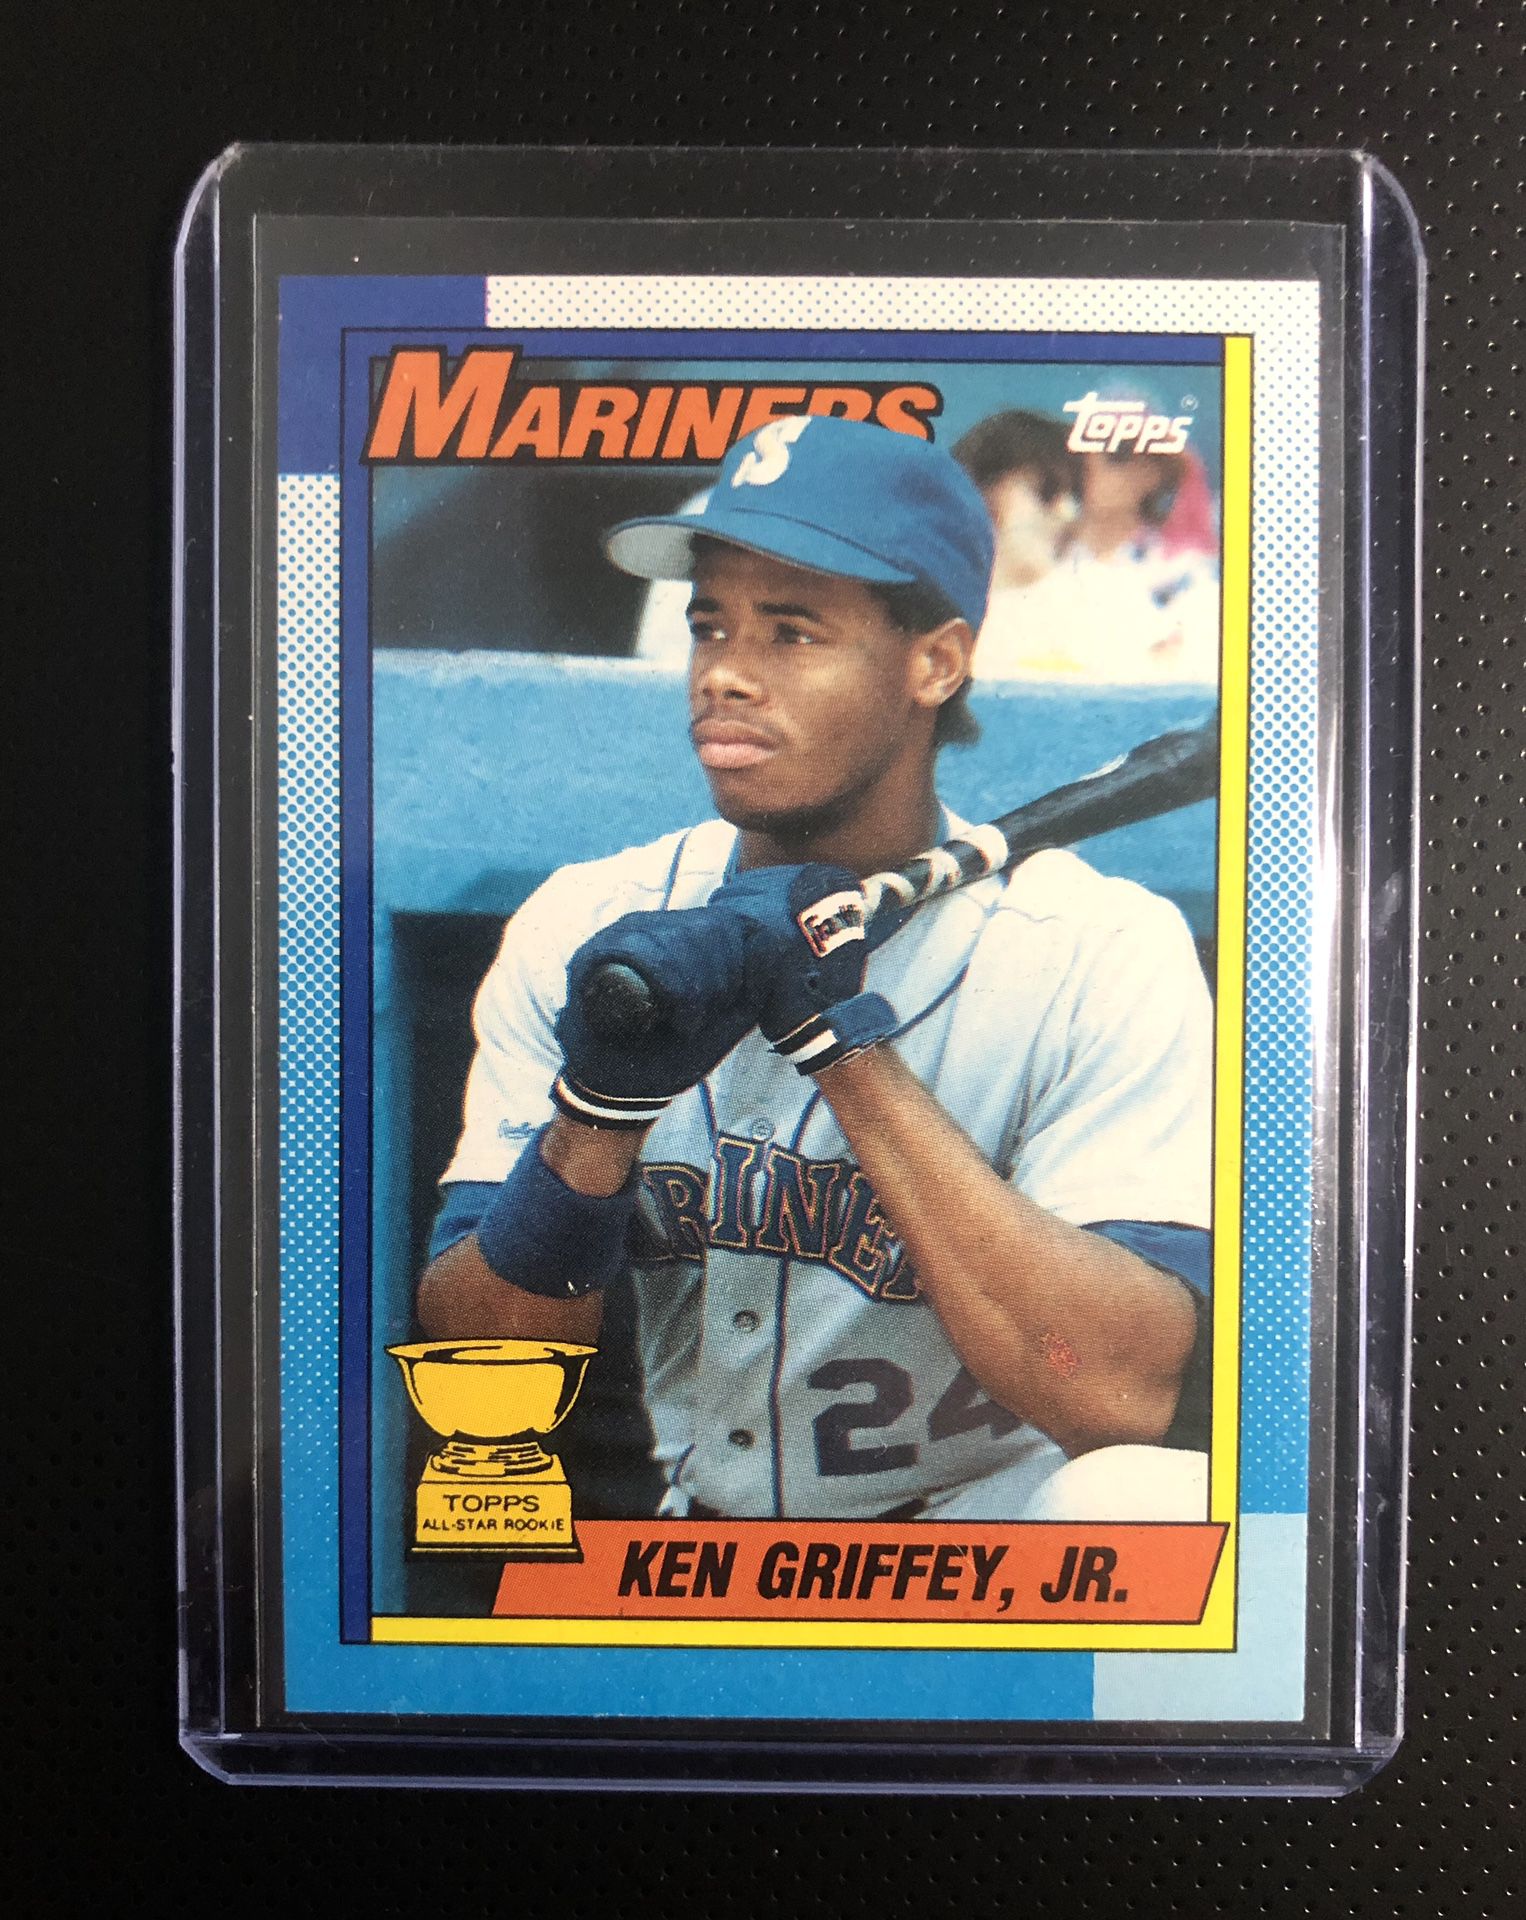 Ken Griffey Jr 1990 Topps All Star Rookie Baseball Card Exceptional Condition!